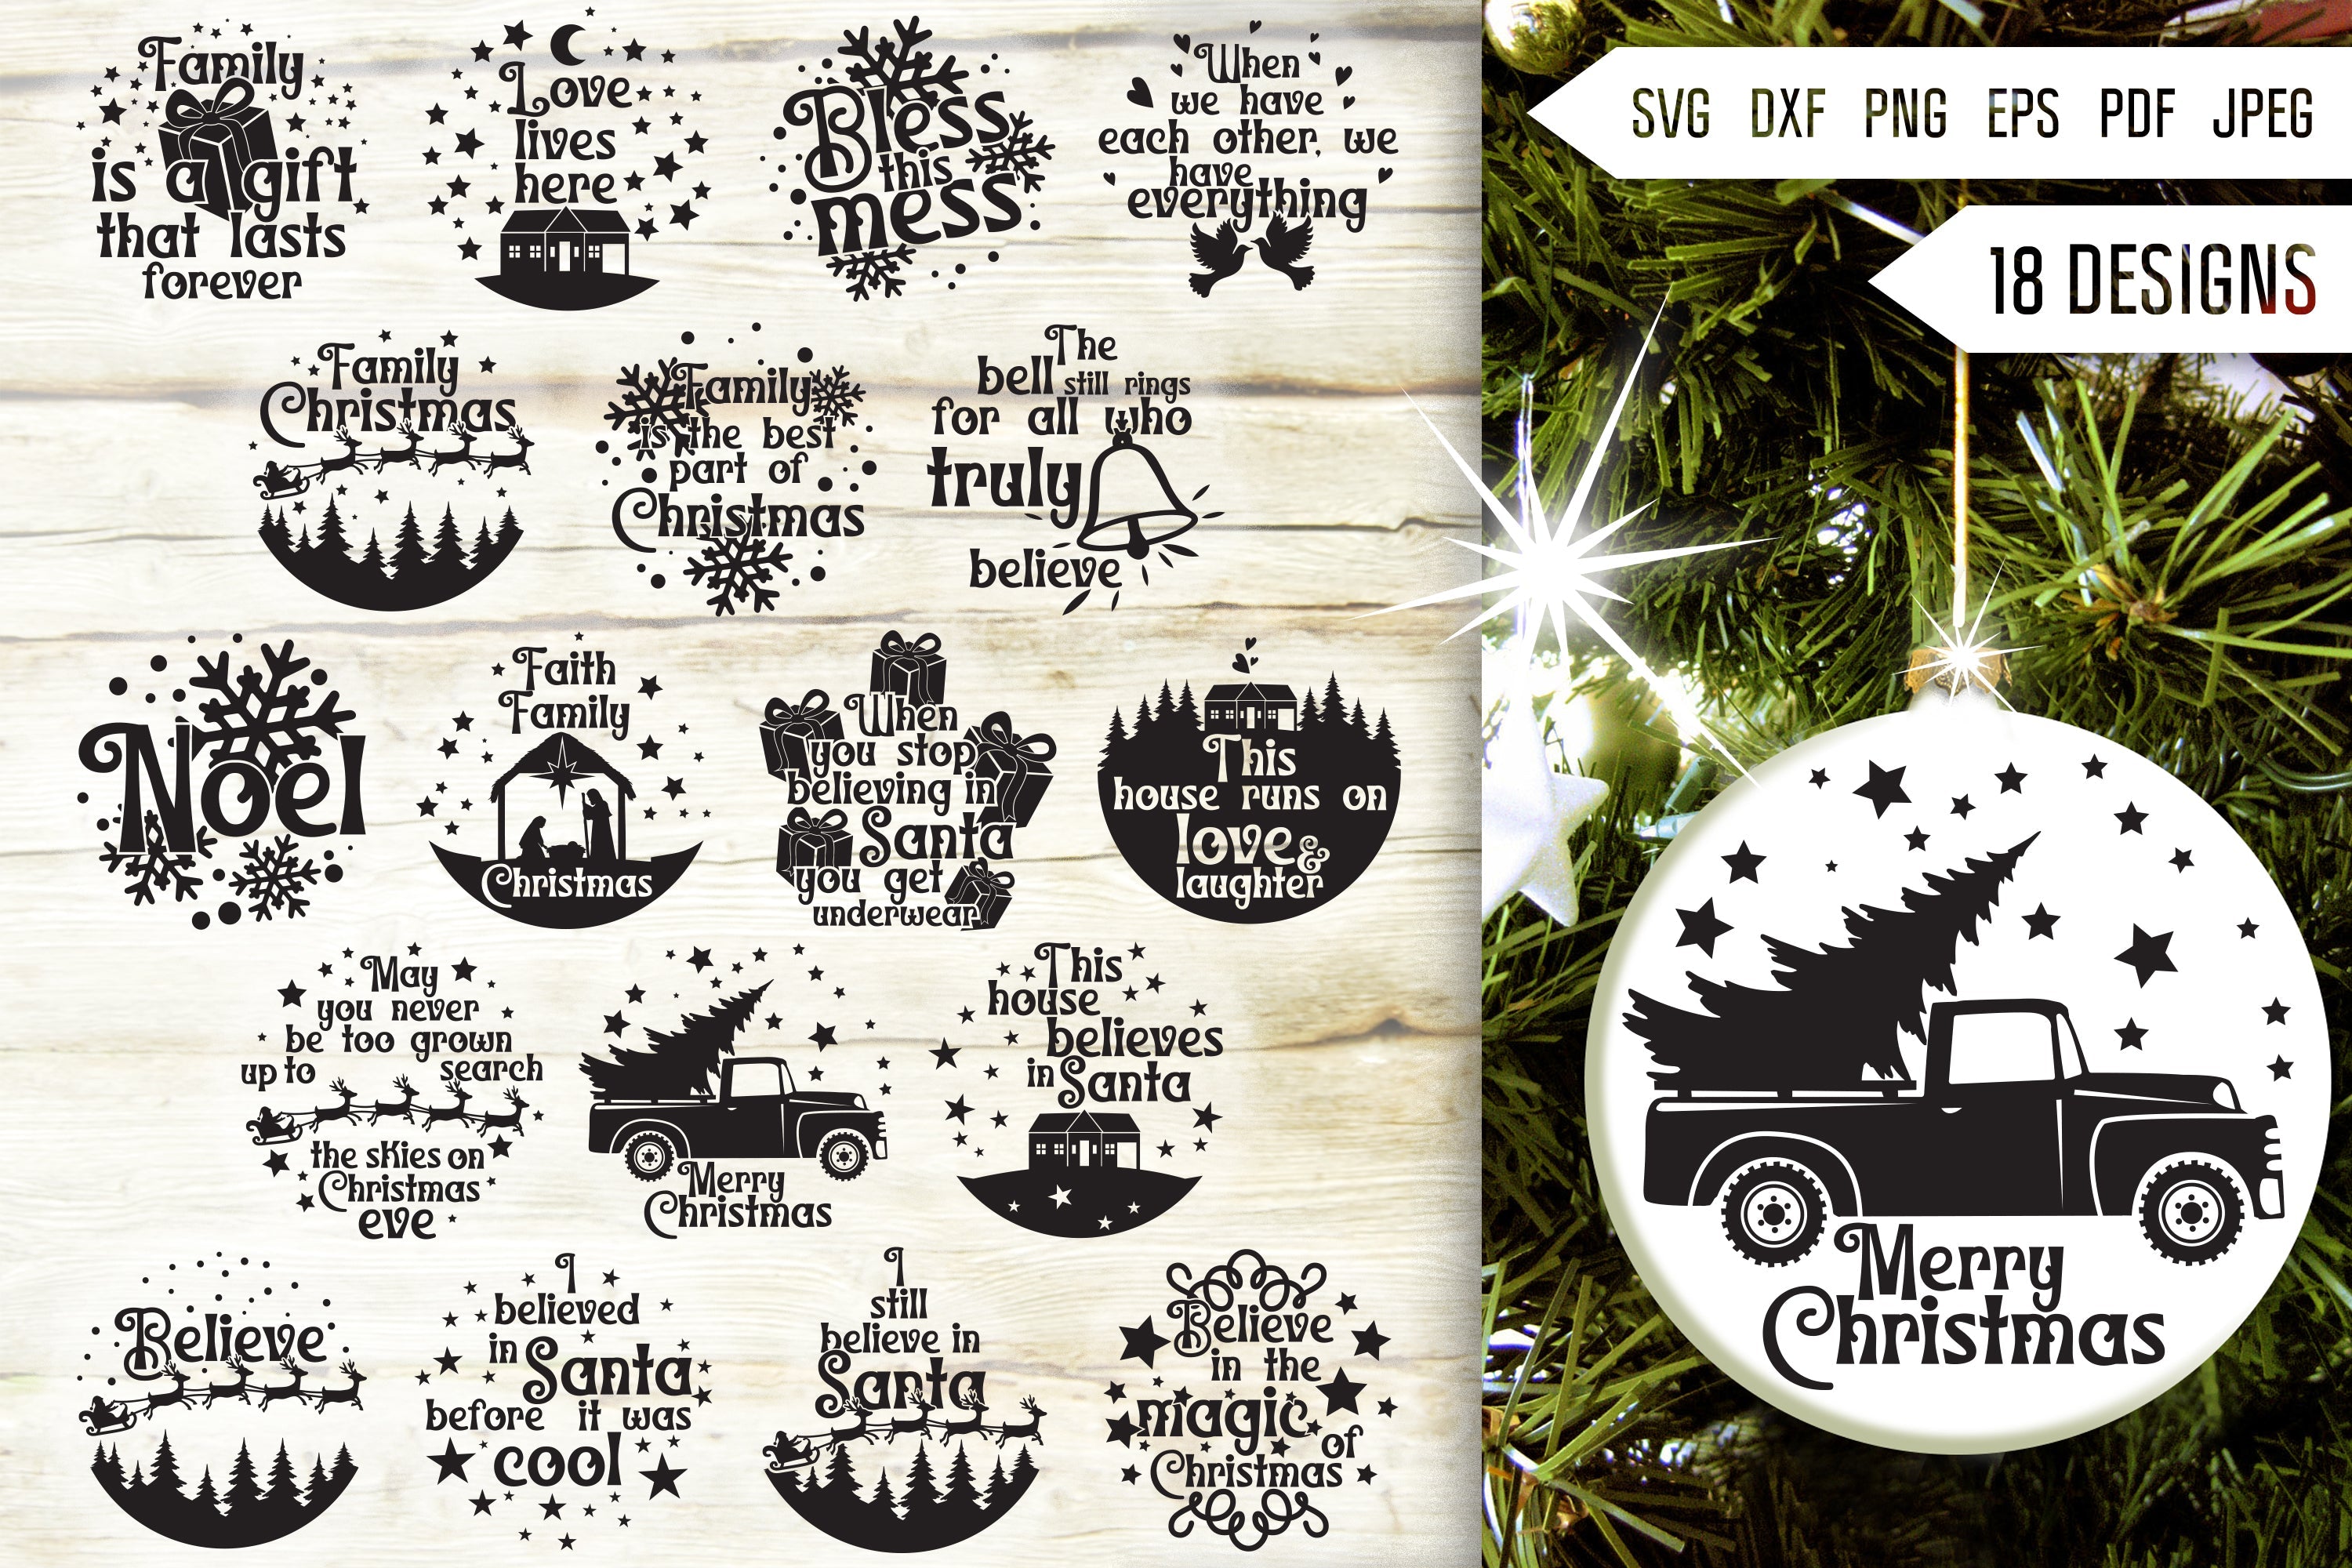 Family Christmas Ornament Svg Bundle. Round Christmas Ornaments Svg. Merry Christmas Svg. Home Quotes, Sayings and Phrases Dxf Eps Png Pdf - So Fontsy